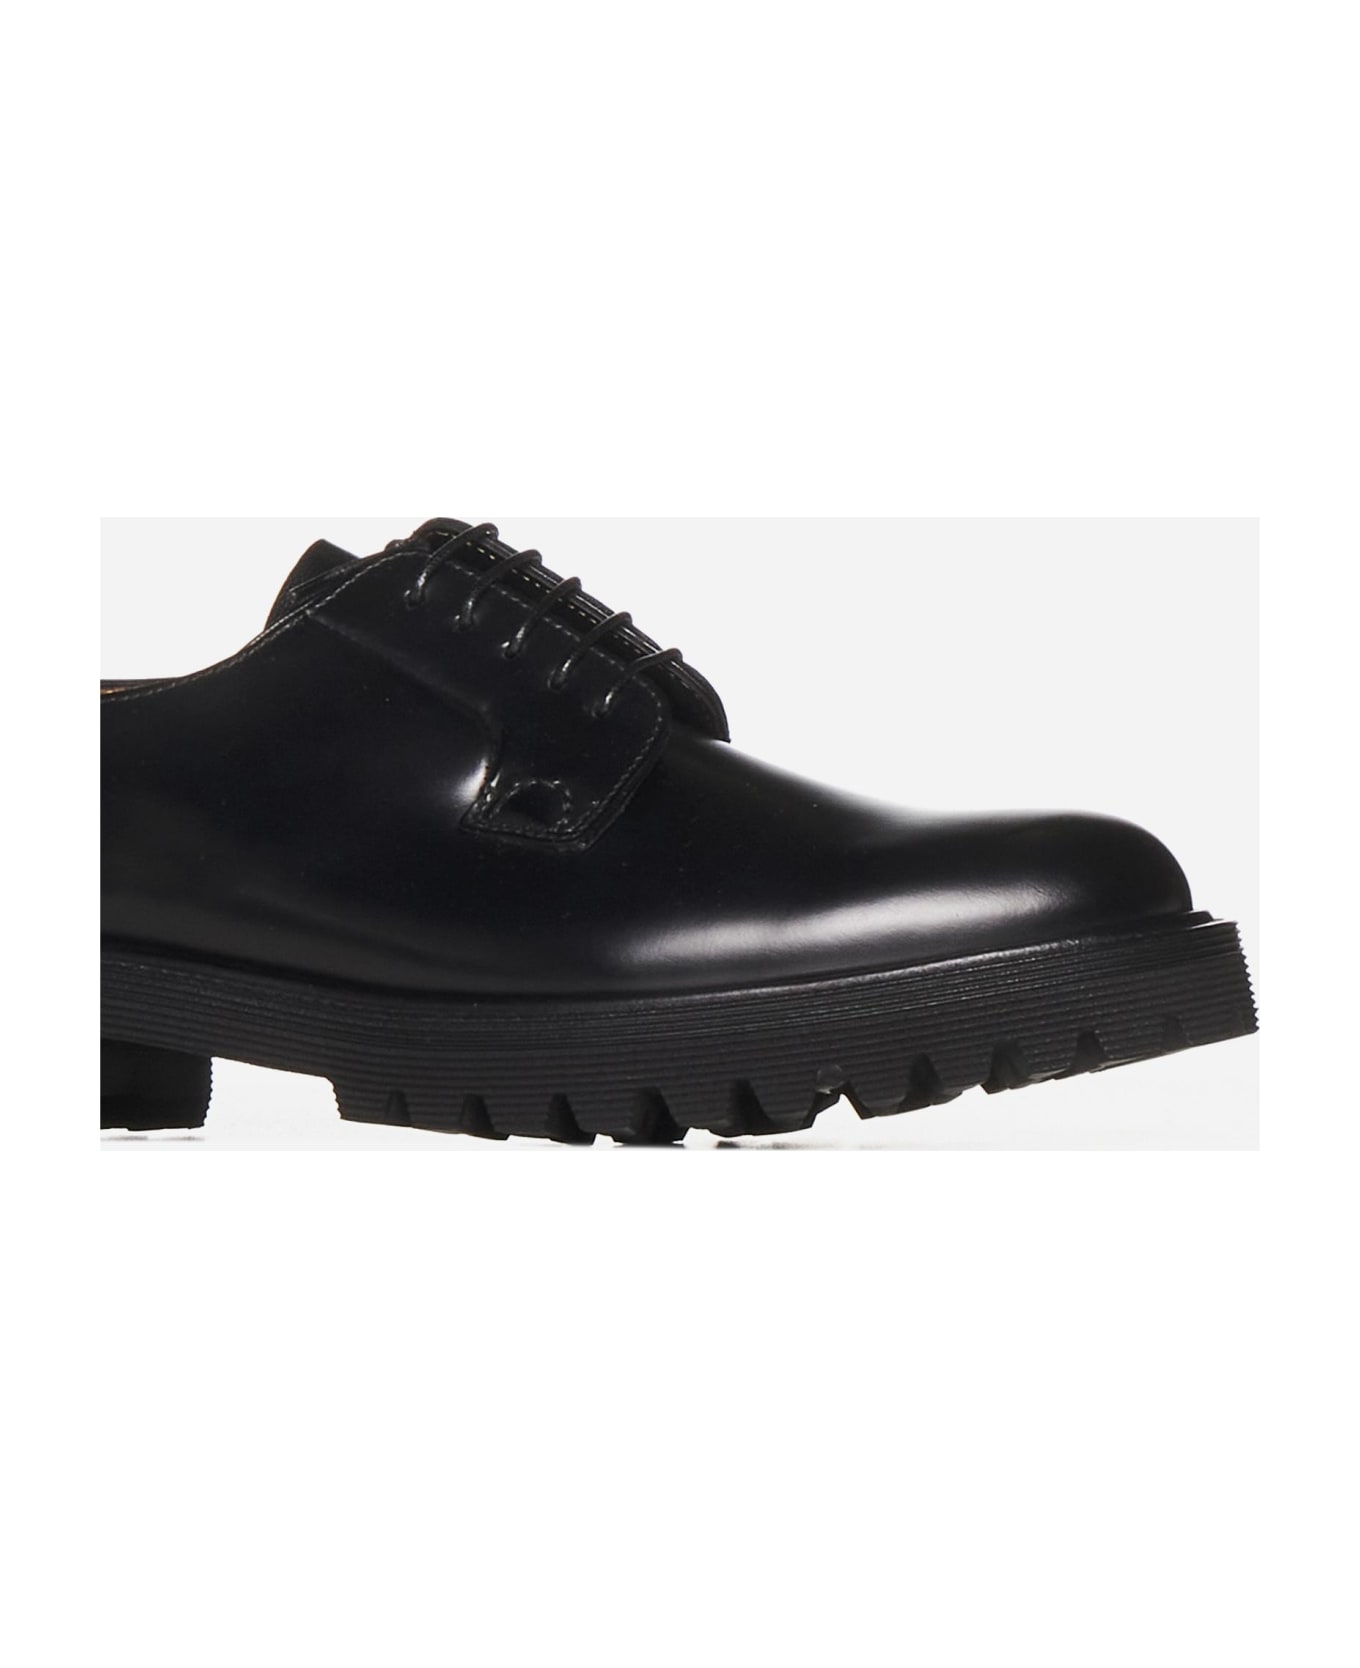 Church's Shannon Leather Derby Shoes - Black